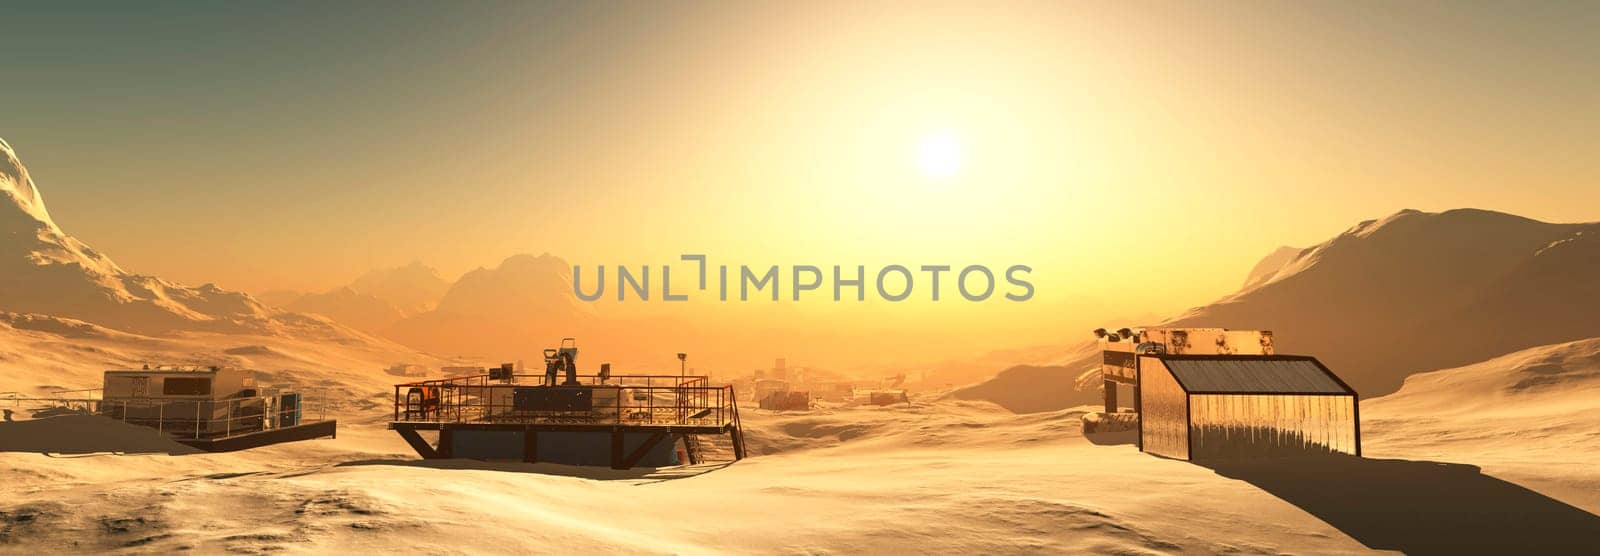 Futuristic Outpost on a Snow-Covered Alien World at Sunrise by Juanjo39